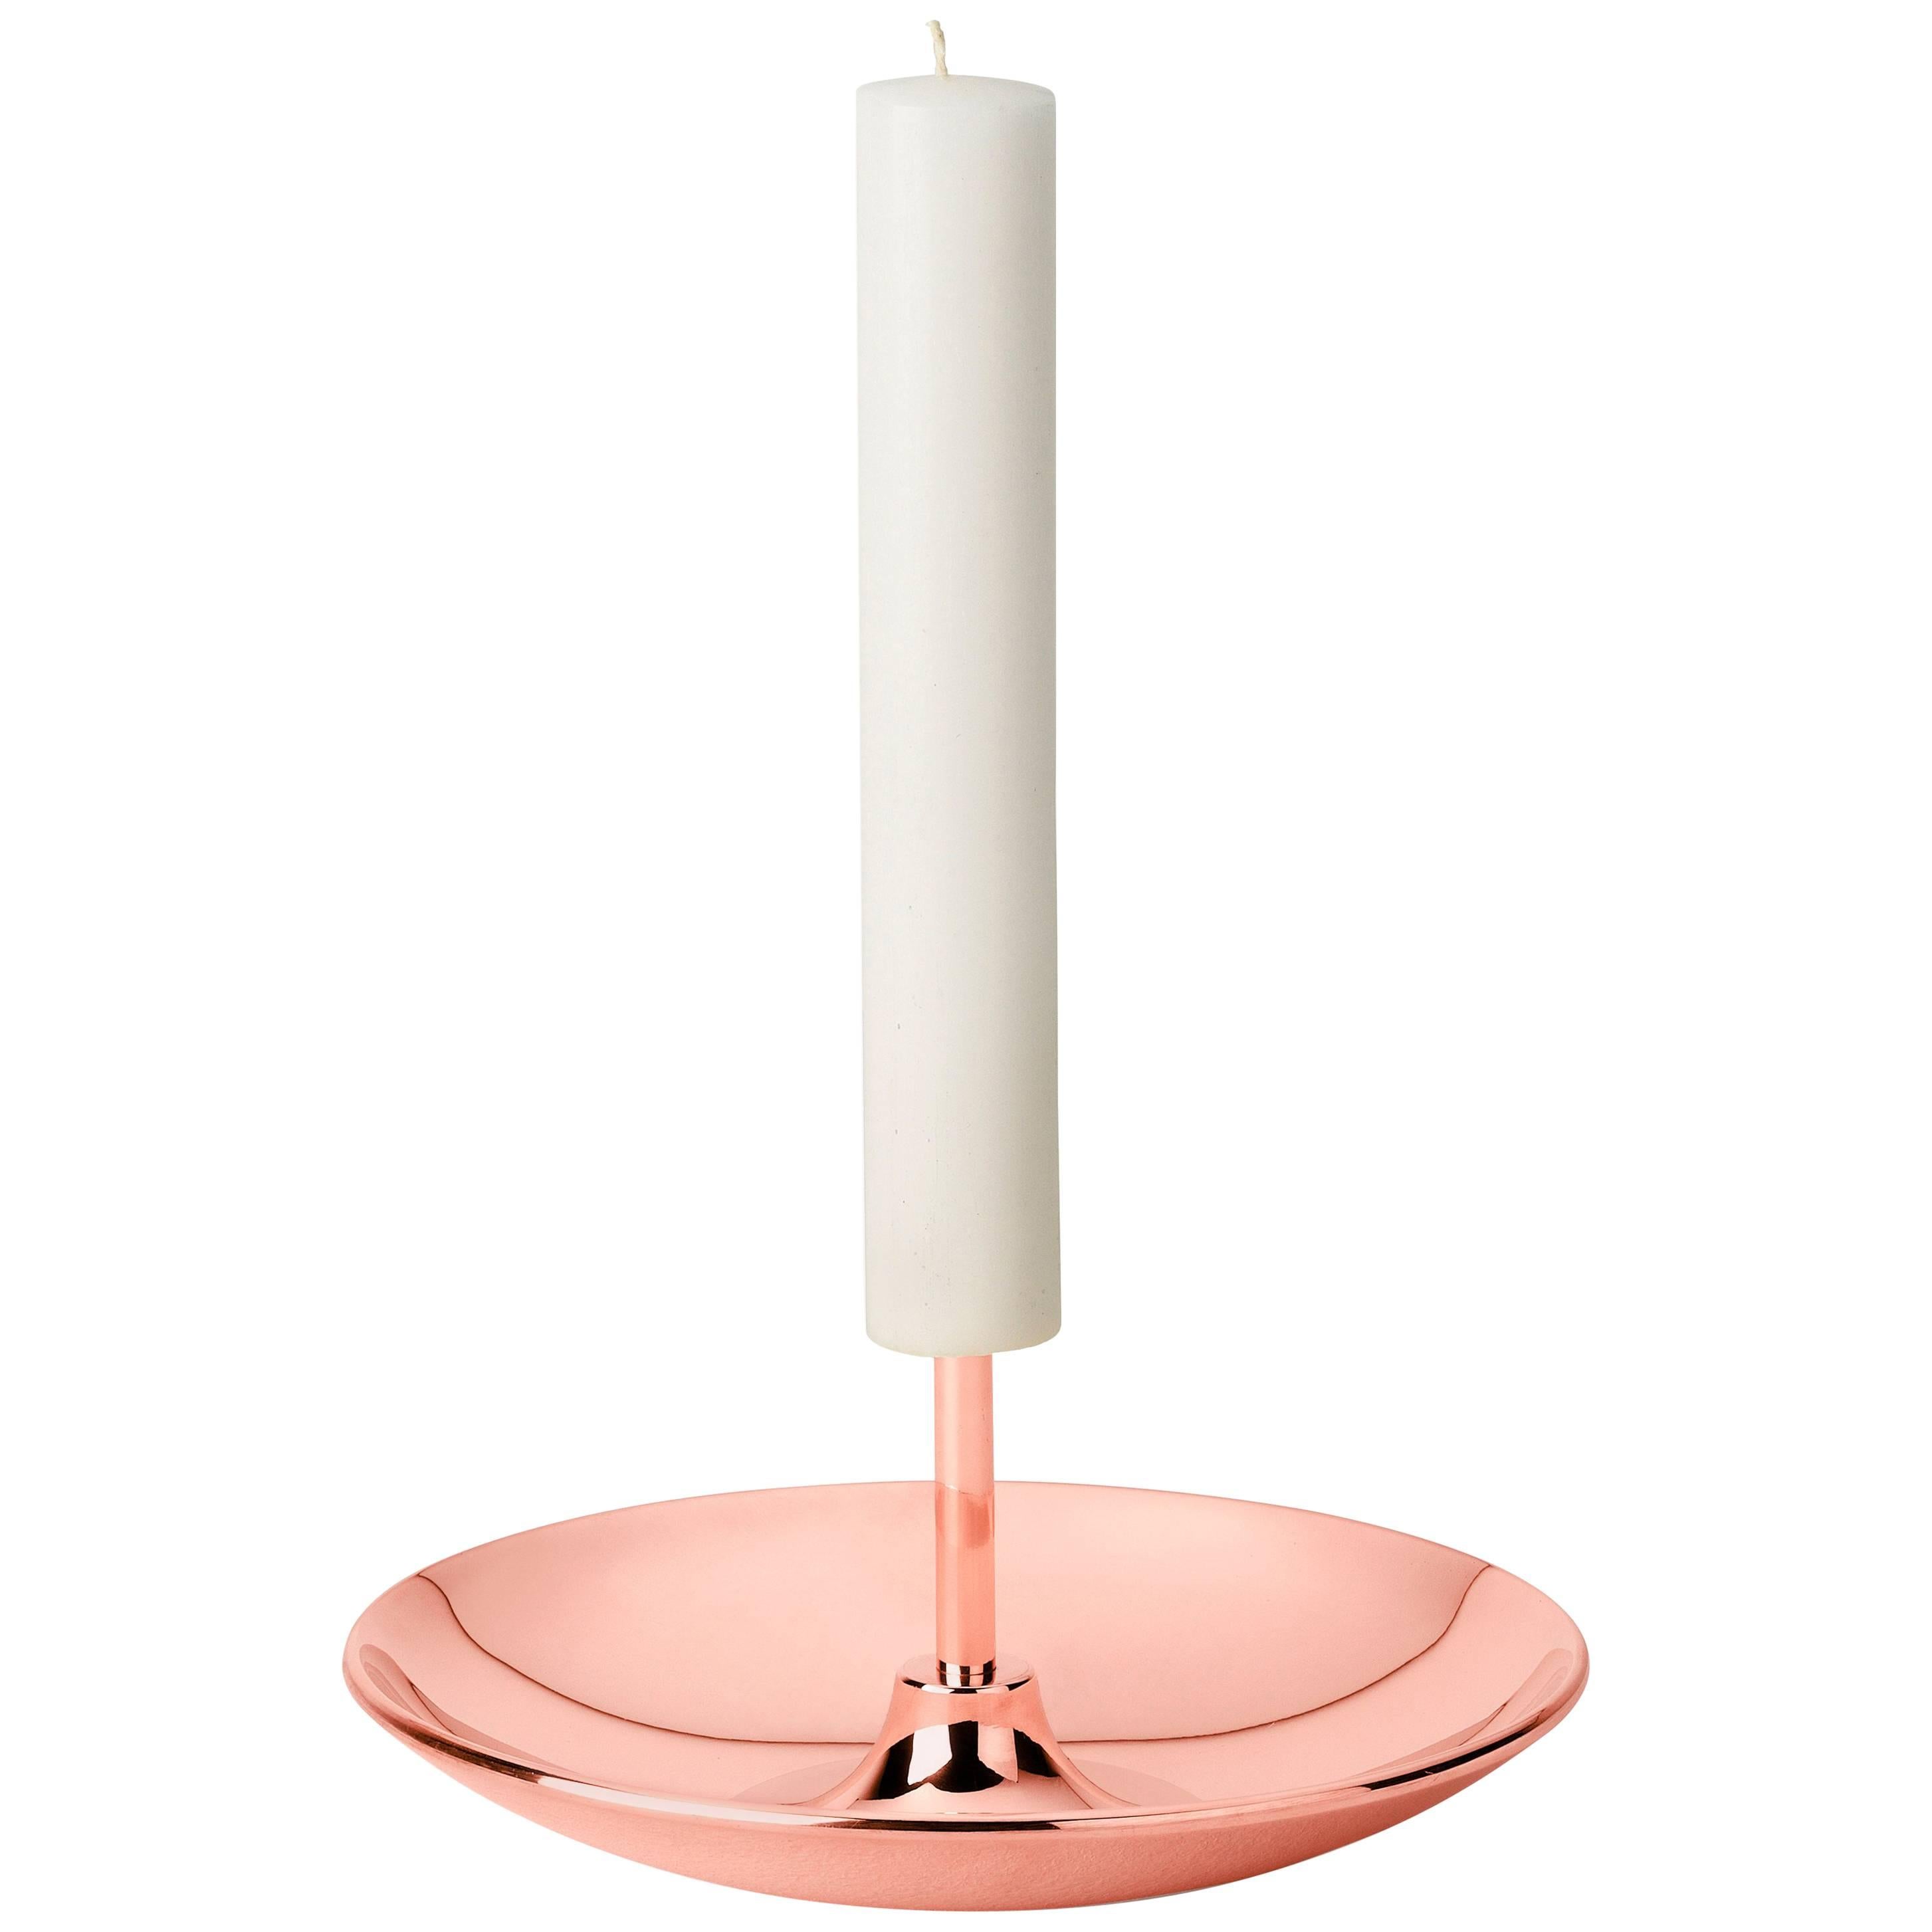 Ghidini 1961 There "Push Pin" Candlestick in Rose Gold Finish For Sale